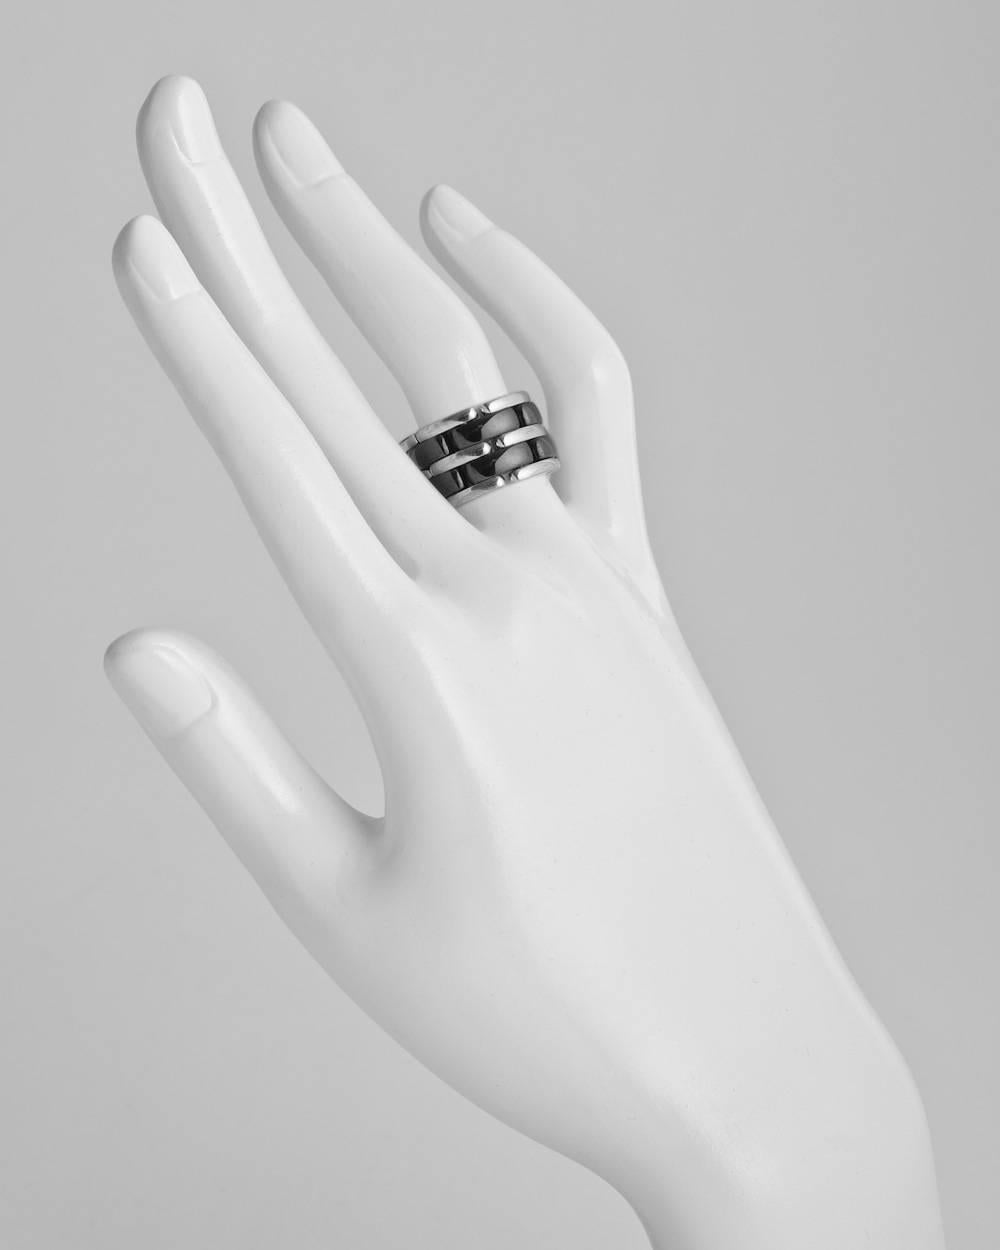 Large 'Ultra' band ring, composed of two rows of black ceramic links alternating with 18k white gold links, signed Chanel. Ring size 9. 12mm width.

$3,350 current approximate retail